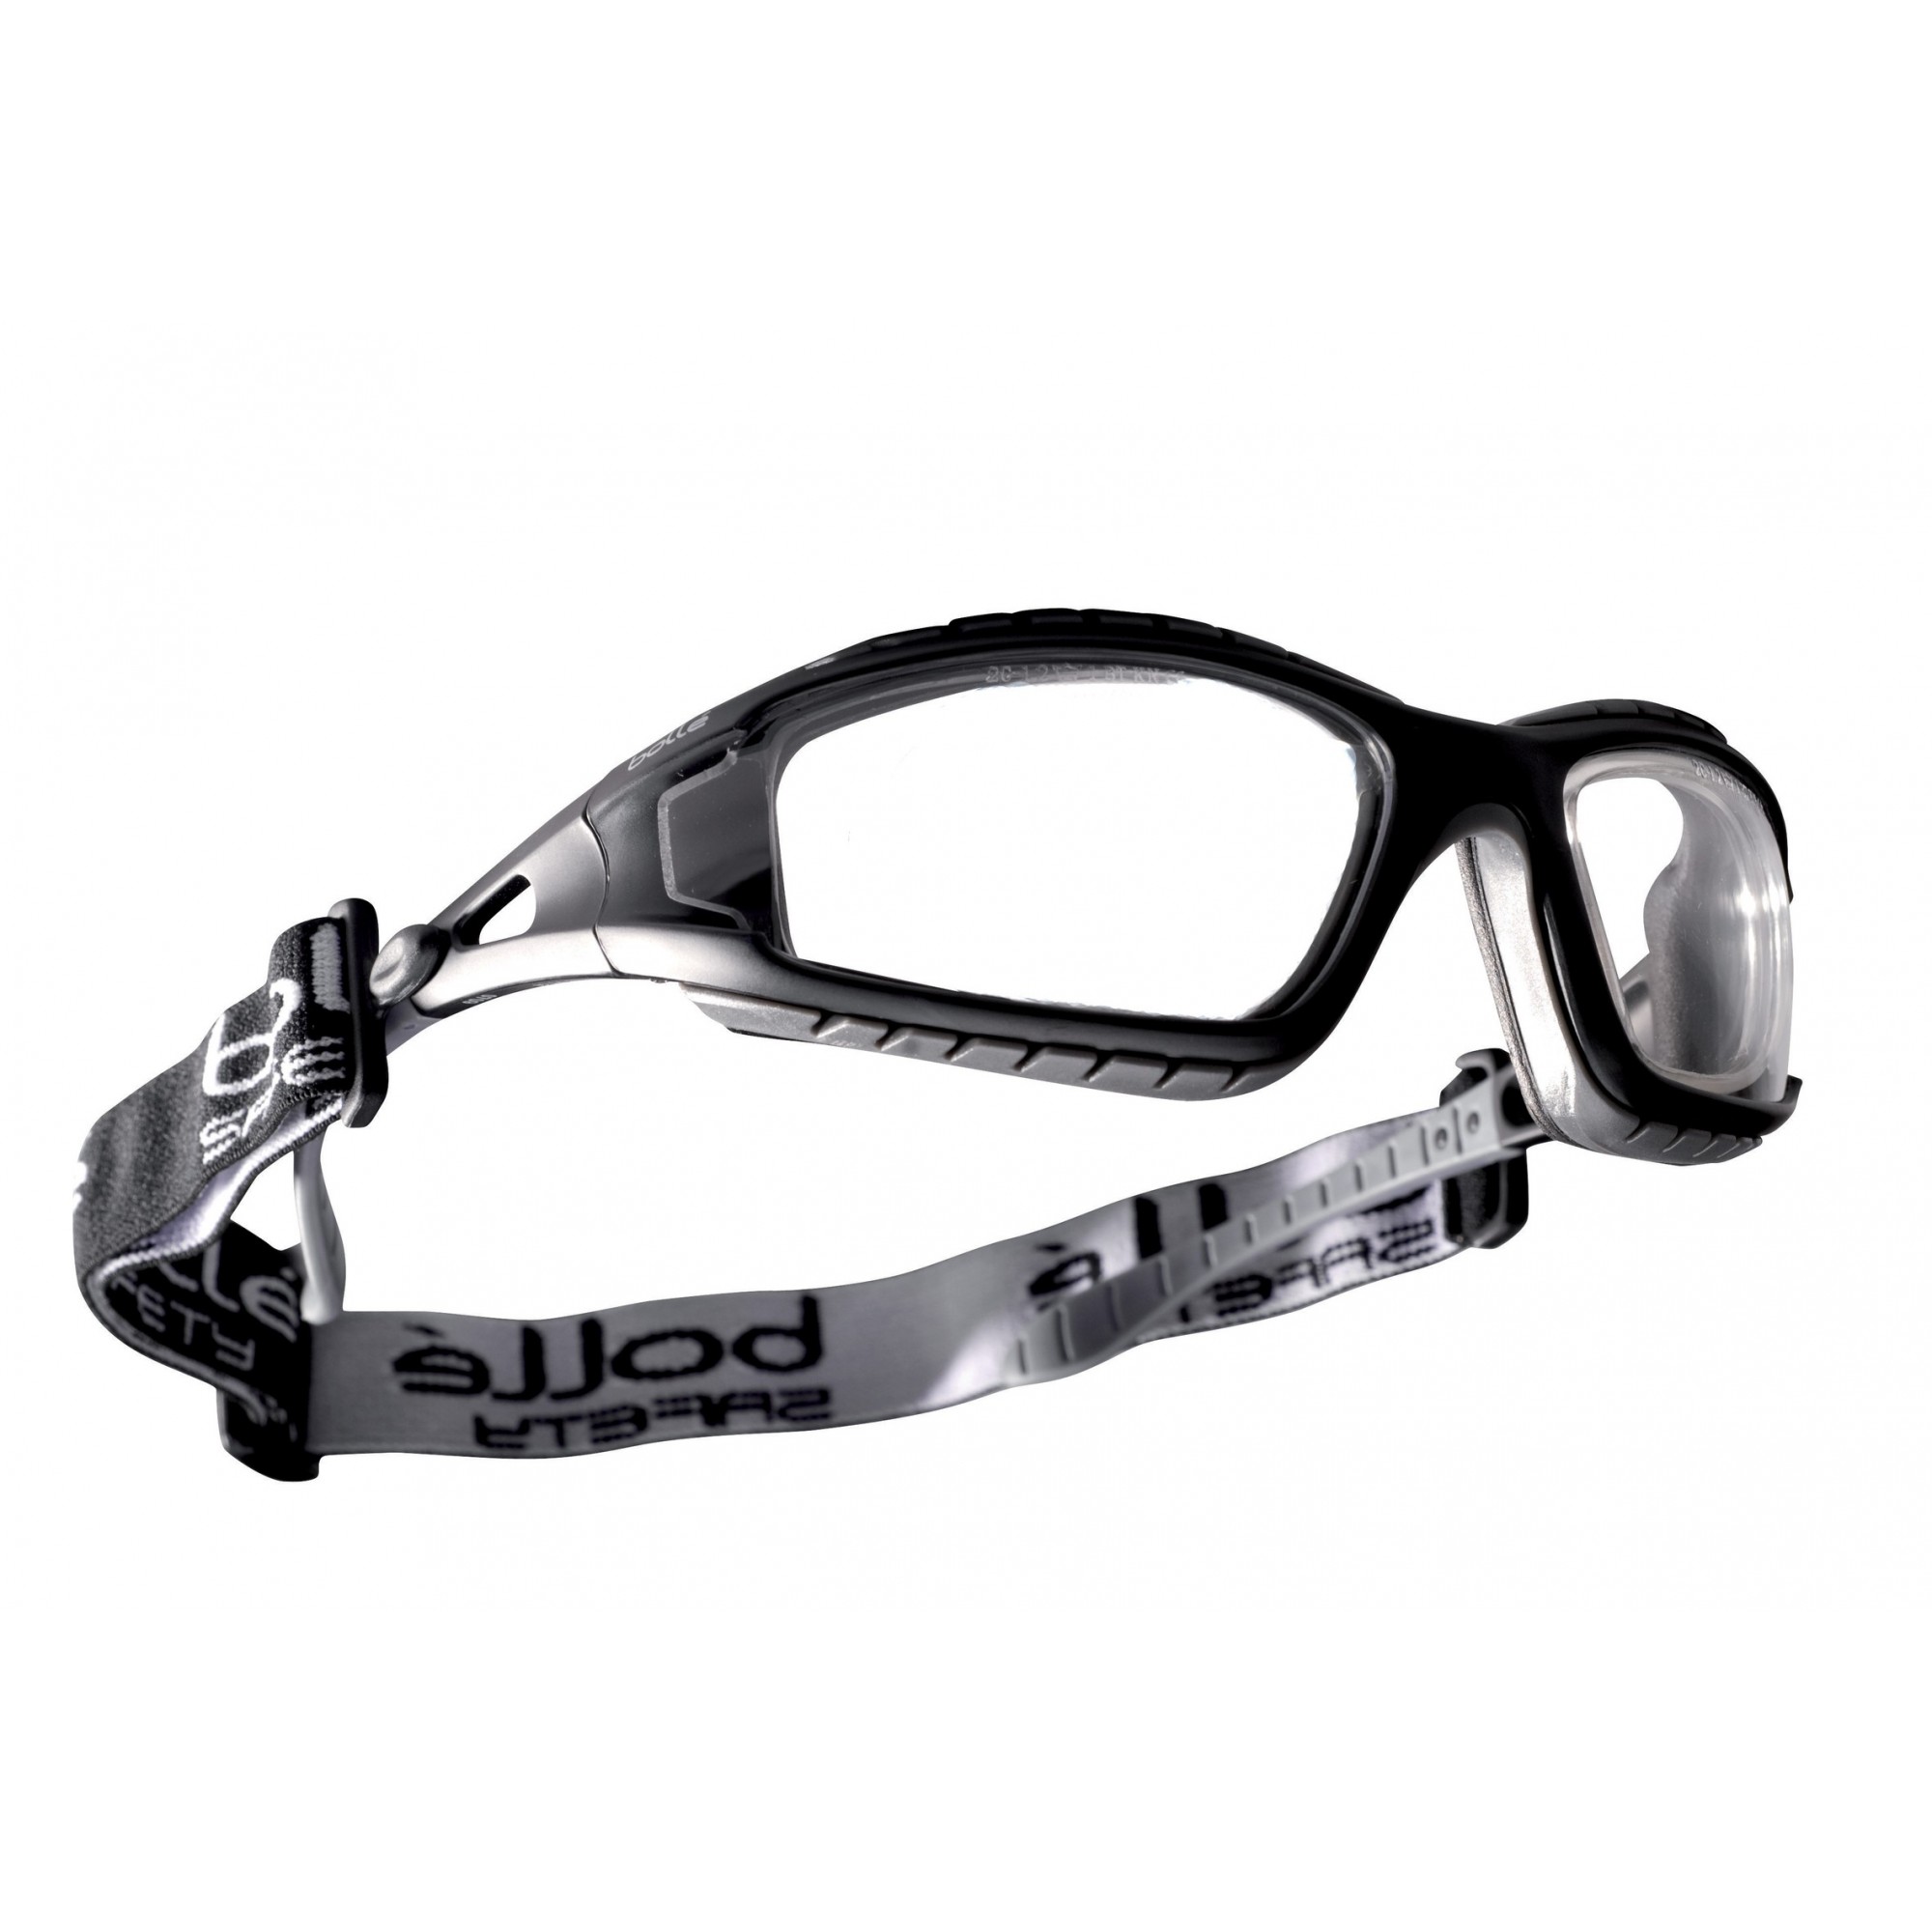 Lunettes de protection TRACKER - BOLLE - BOLLE SAFETY